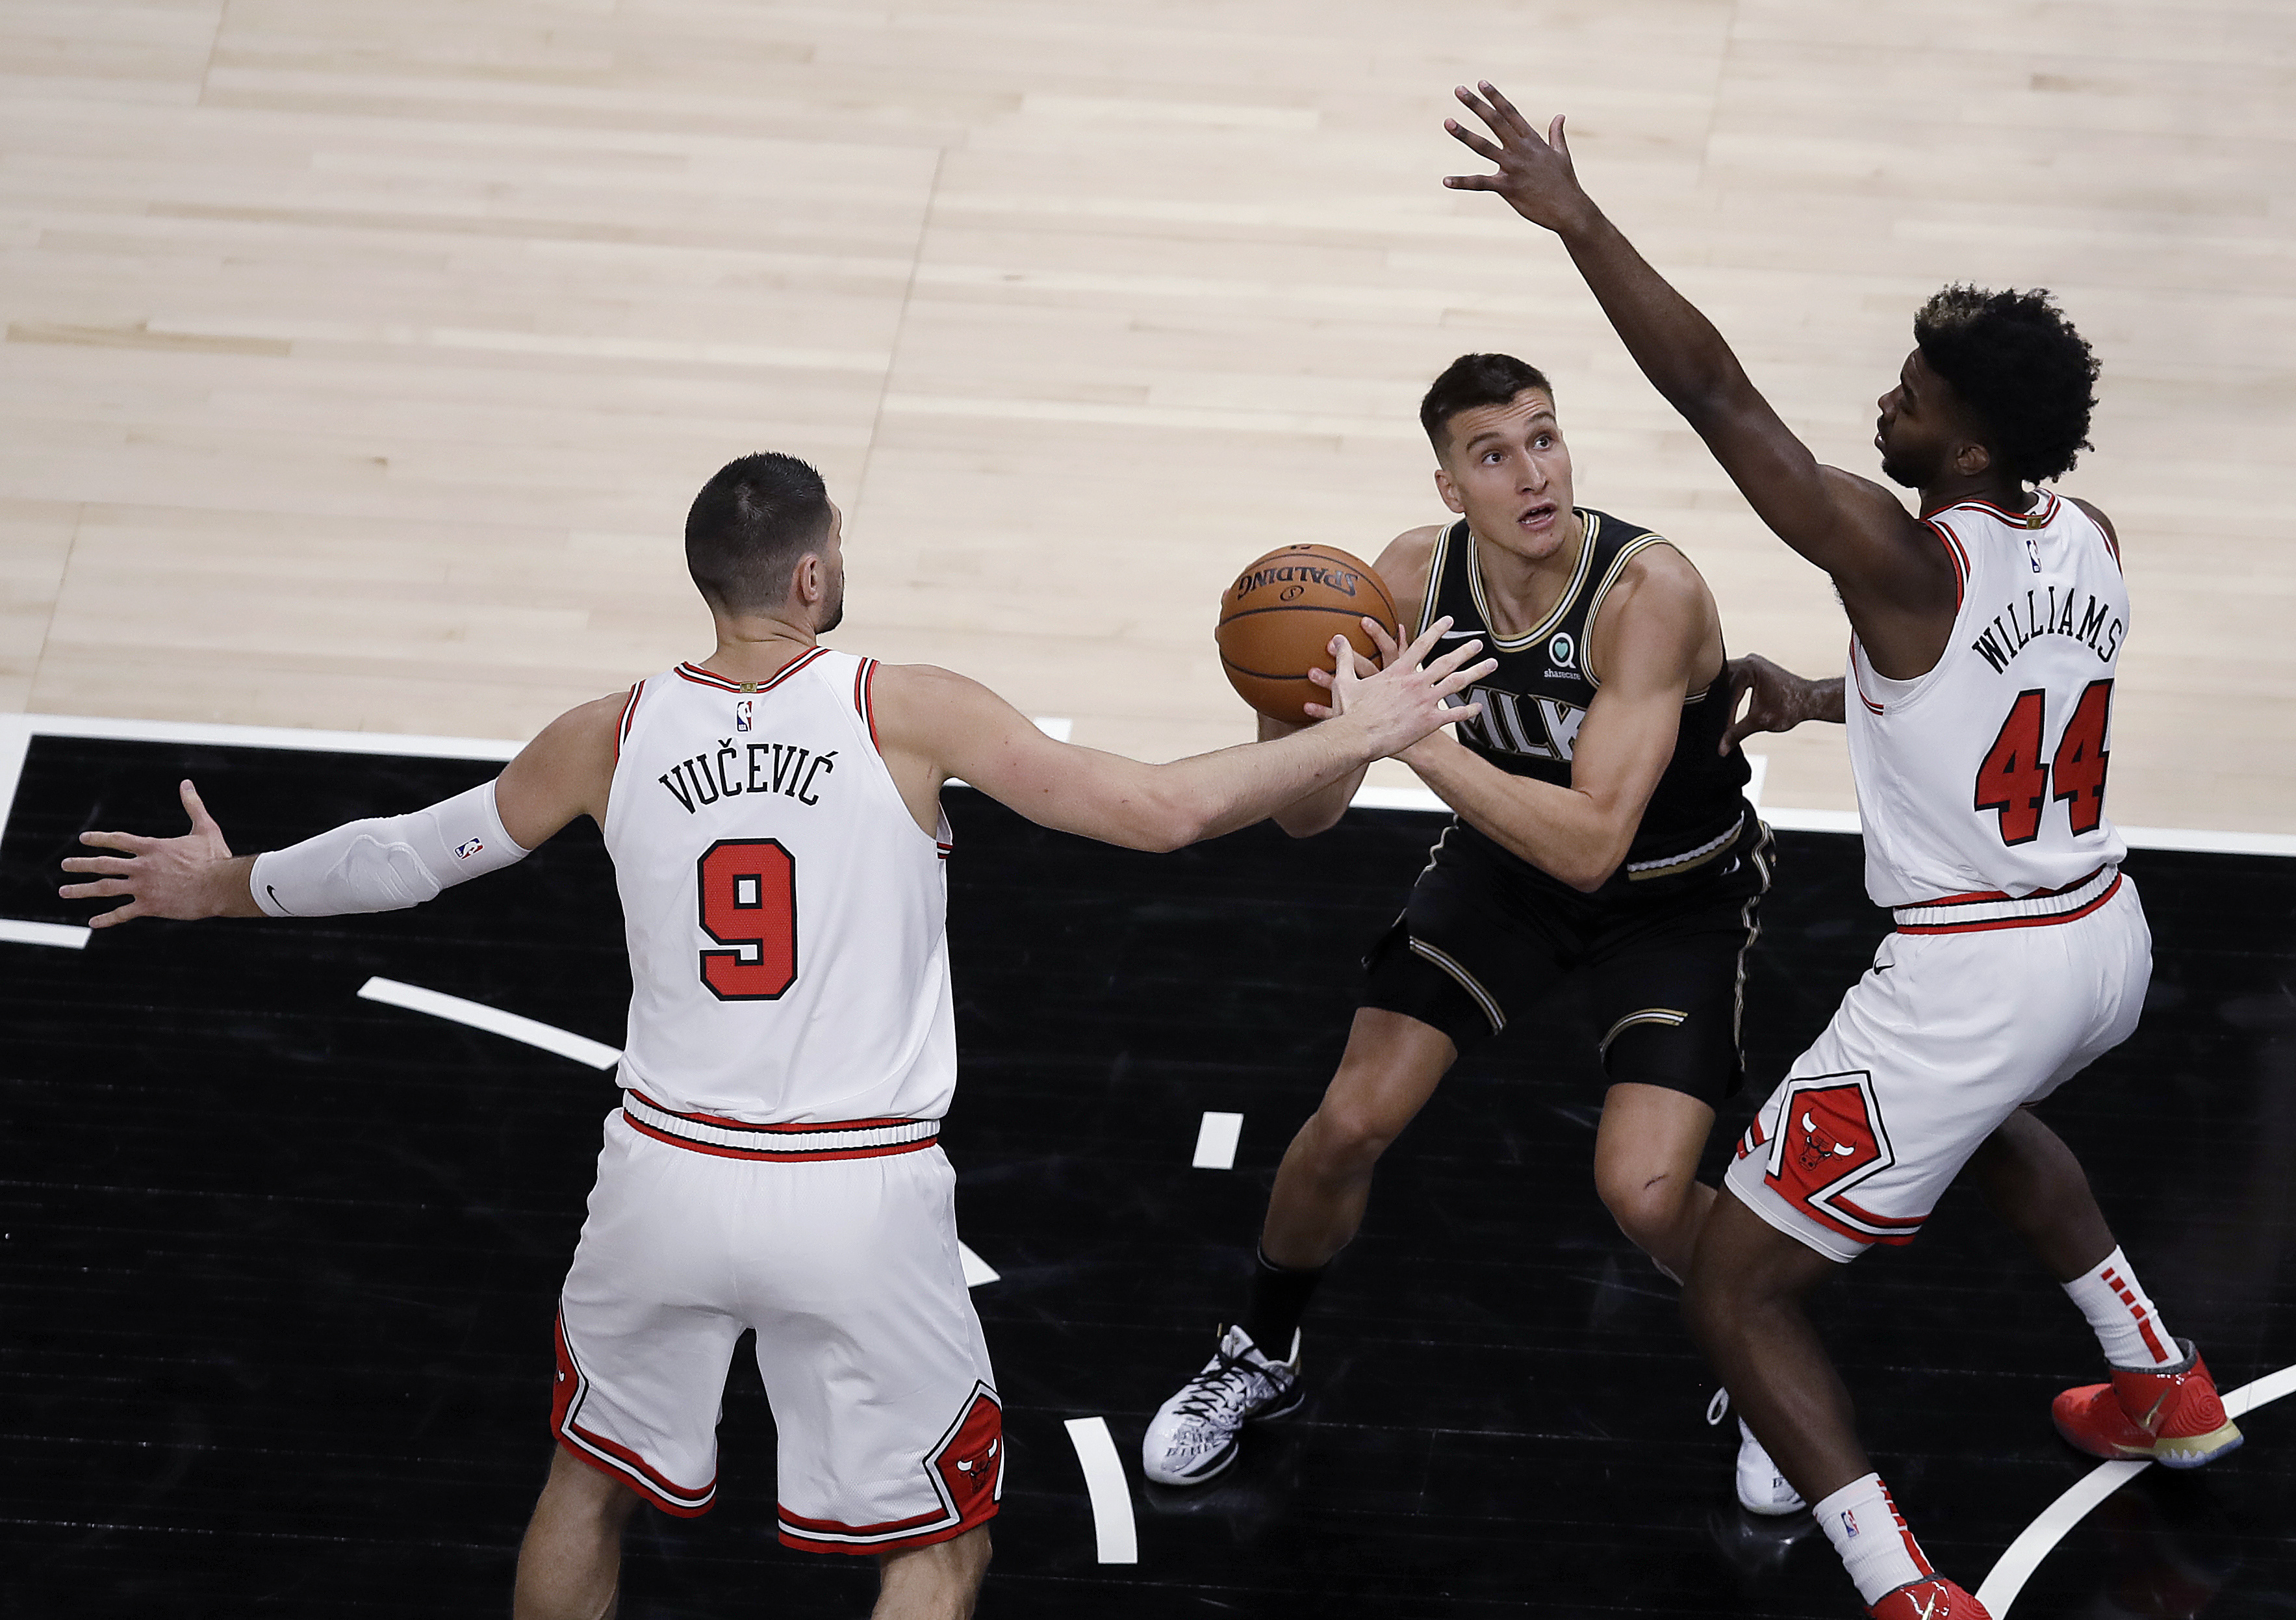 Hawks win 120-108, overcome 50-point game by Bulls' LaVine